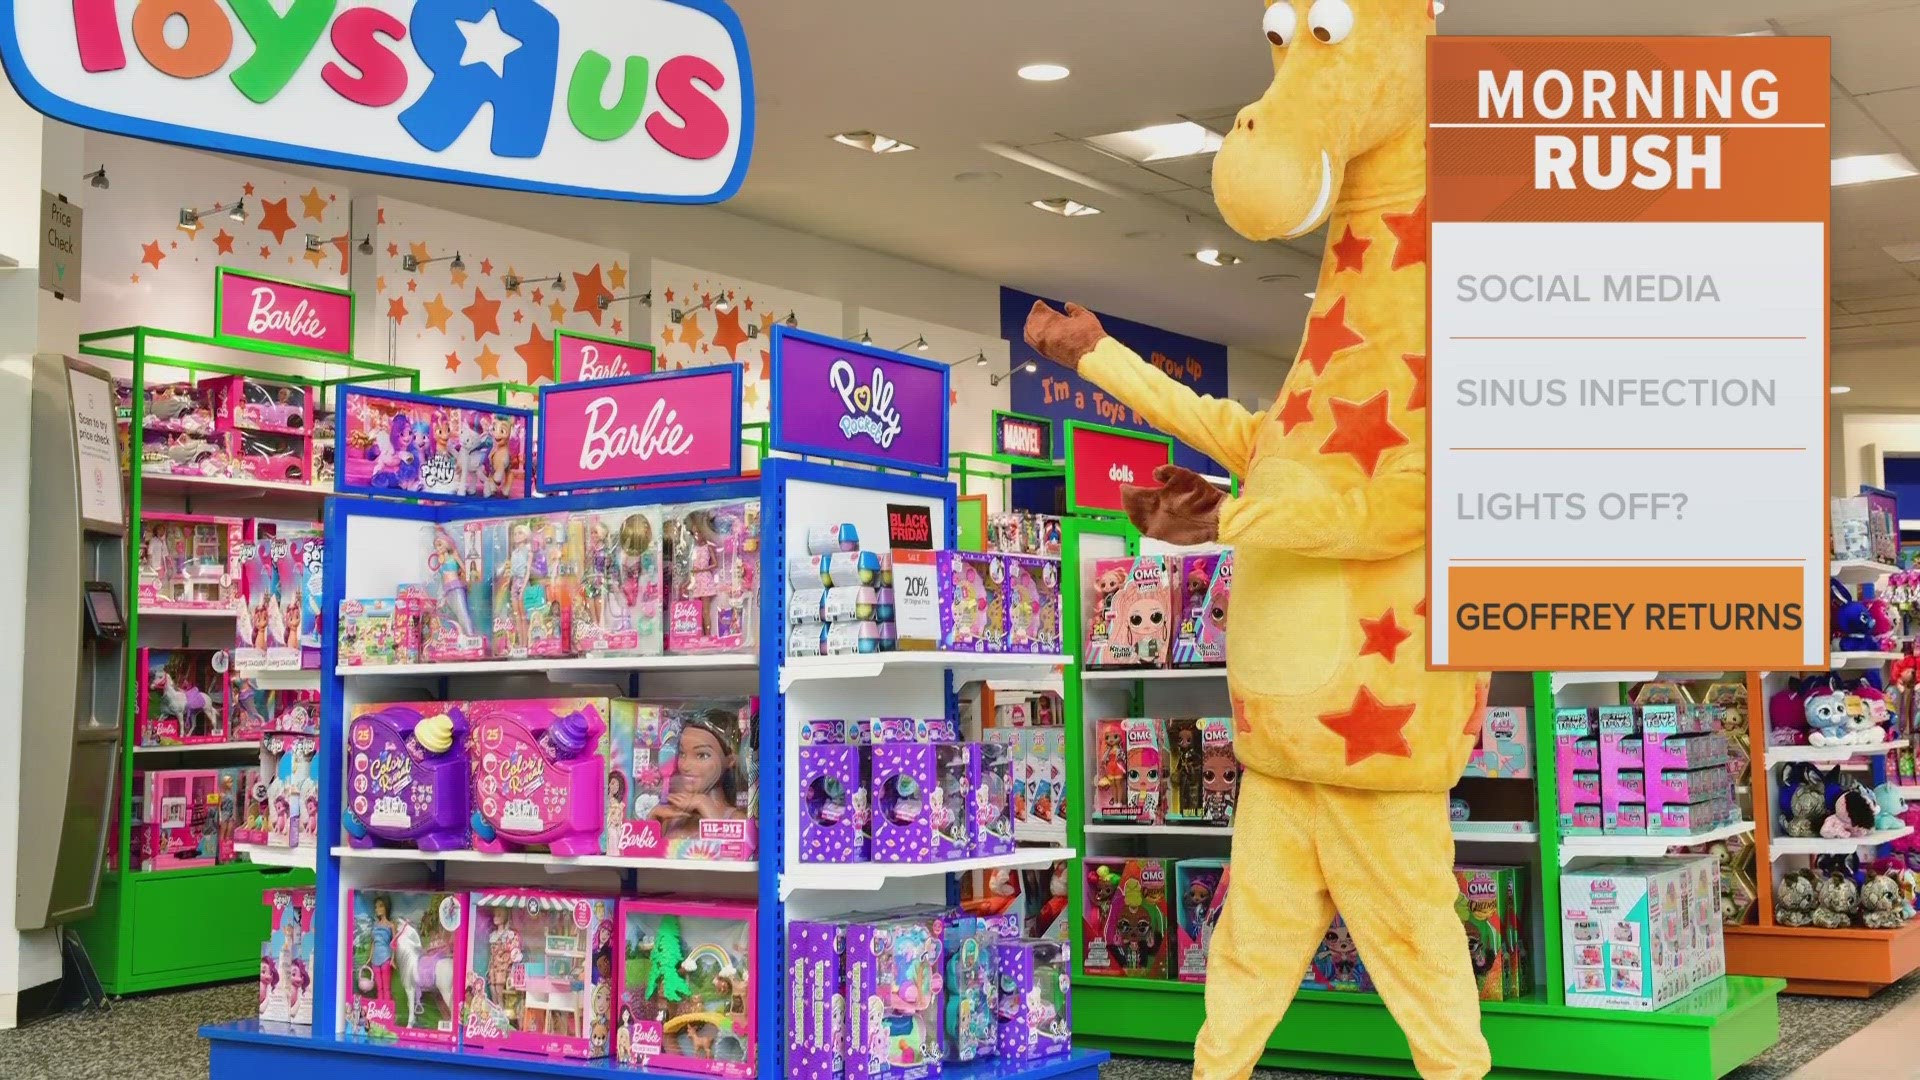 Anybody flying through the Dallas/Fort Worth airport for the holidays will get a first chance to see what the new Toys 'R' Us experience will look like.